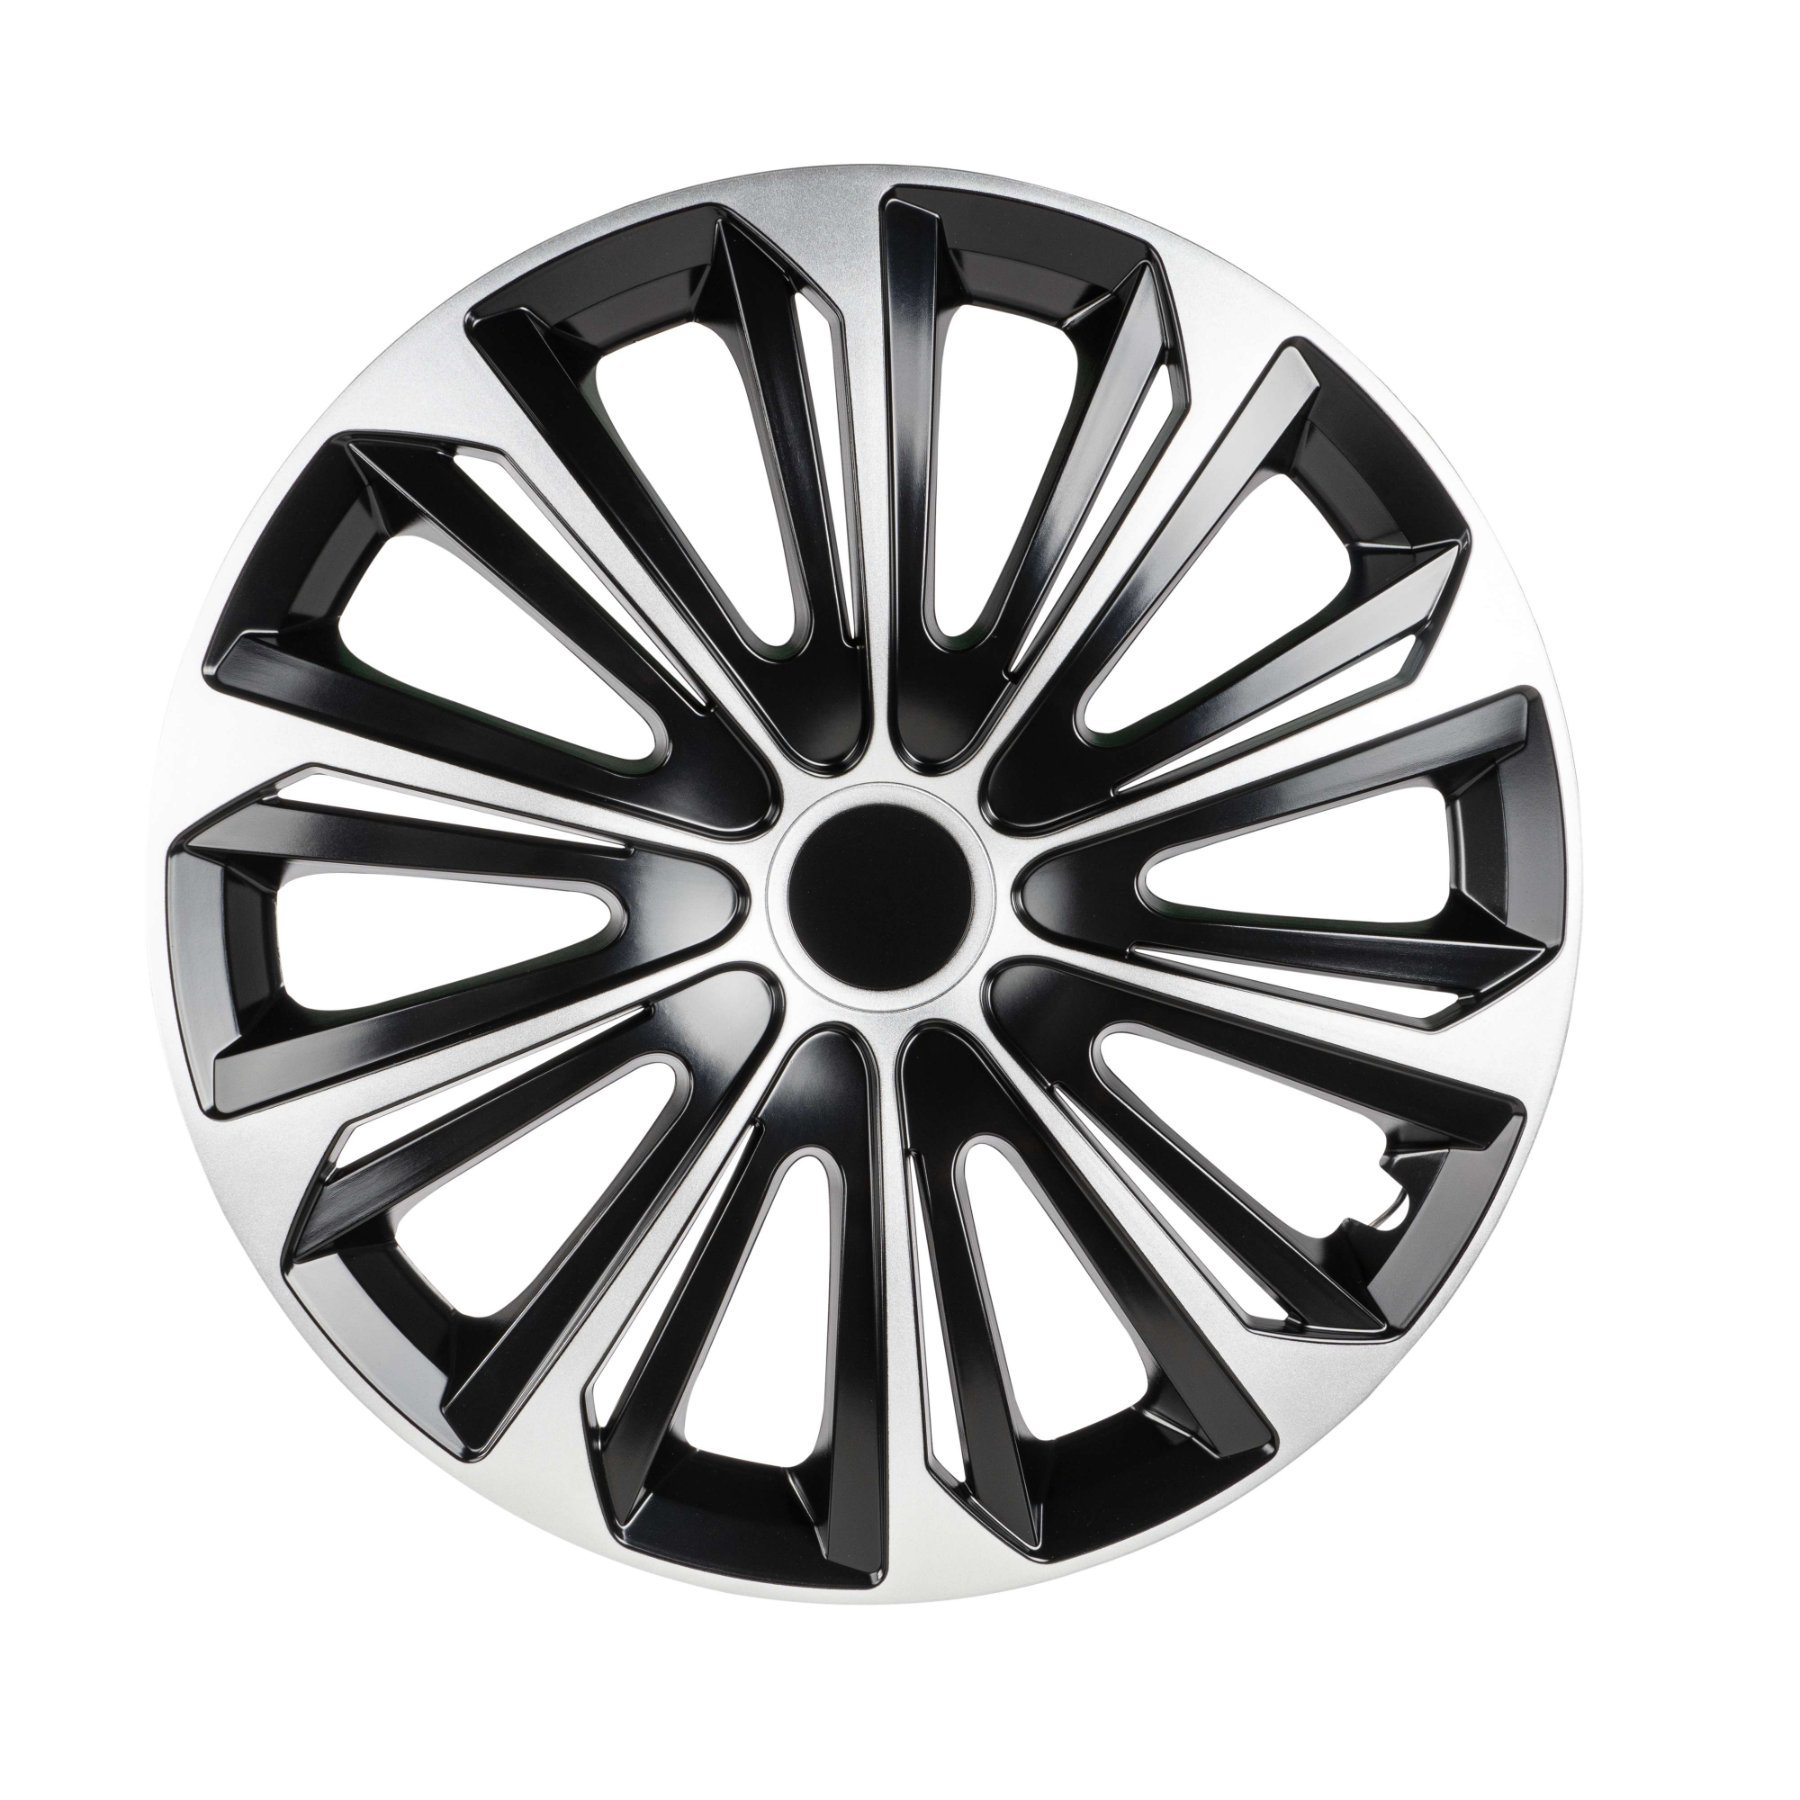 Wheel covers New Racer 15", 4 piece black/silver